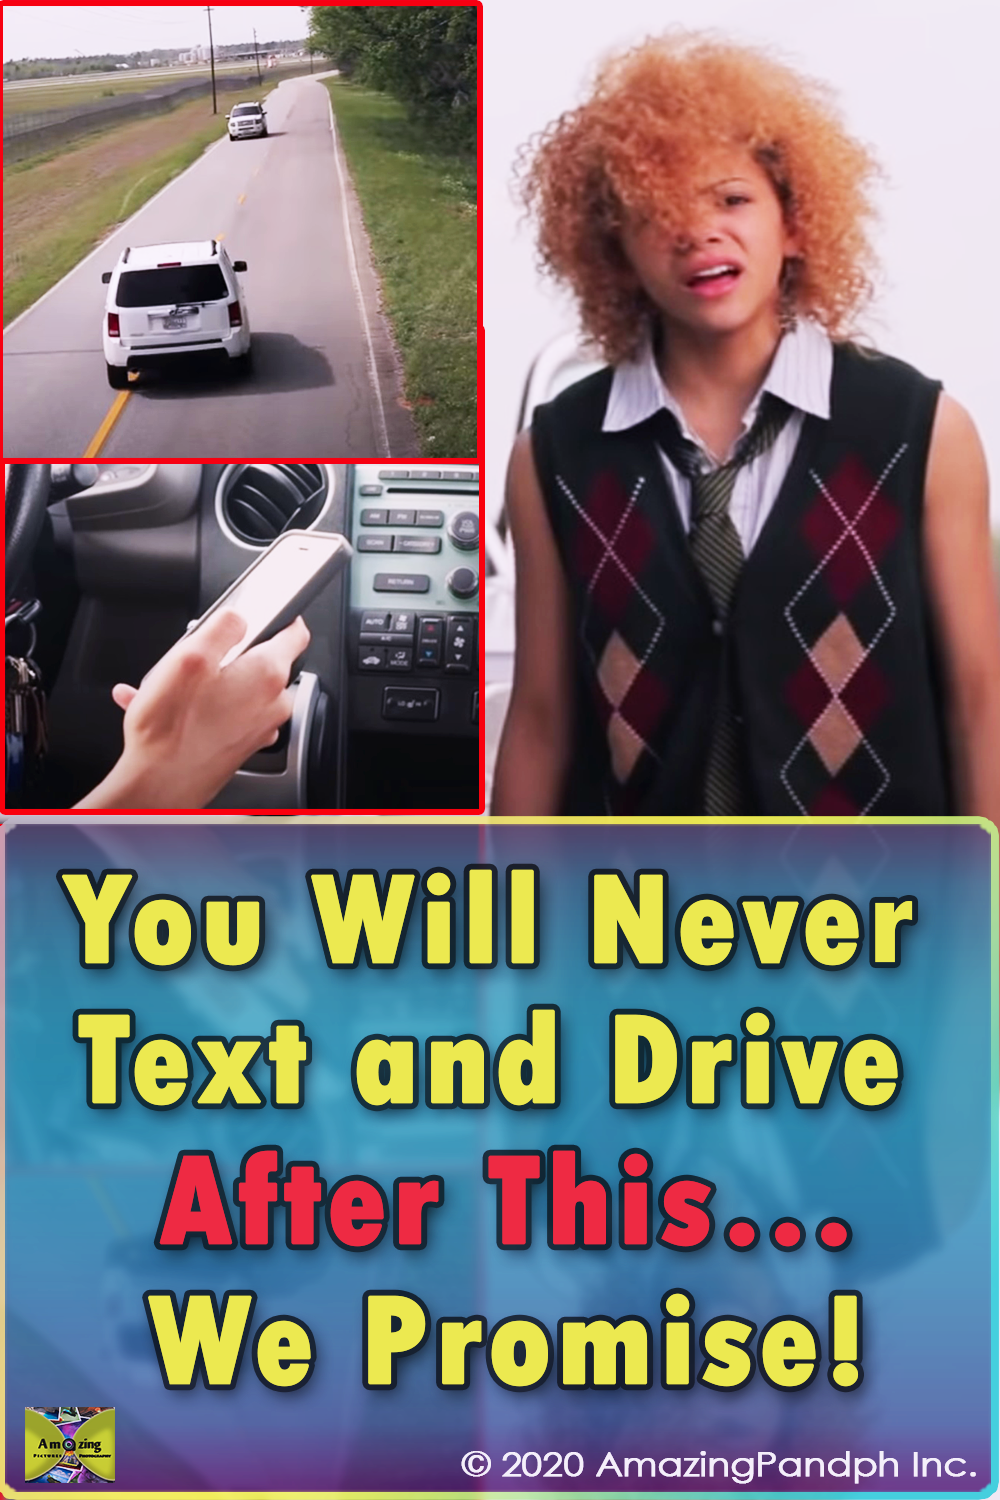 Texting, Drive, danger, warning, Accident, Powerful, ad, phone, car,